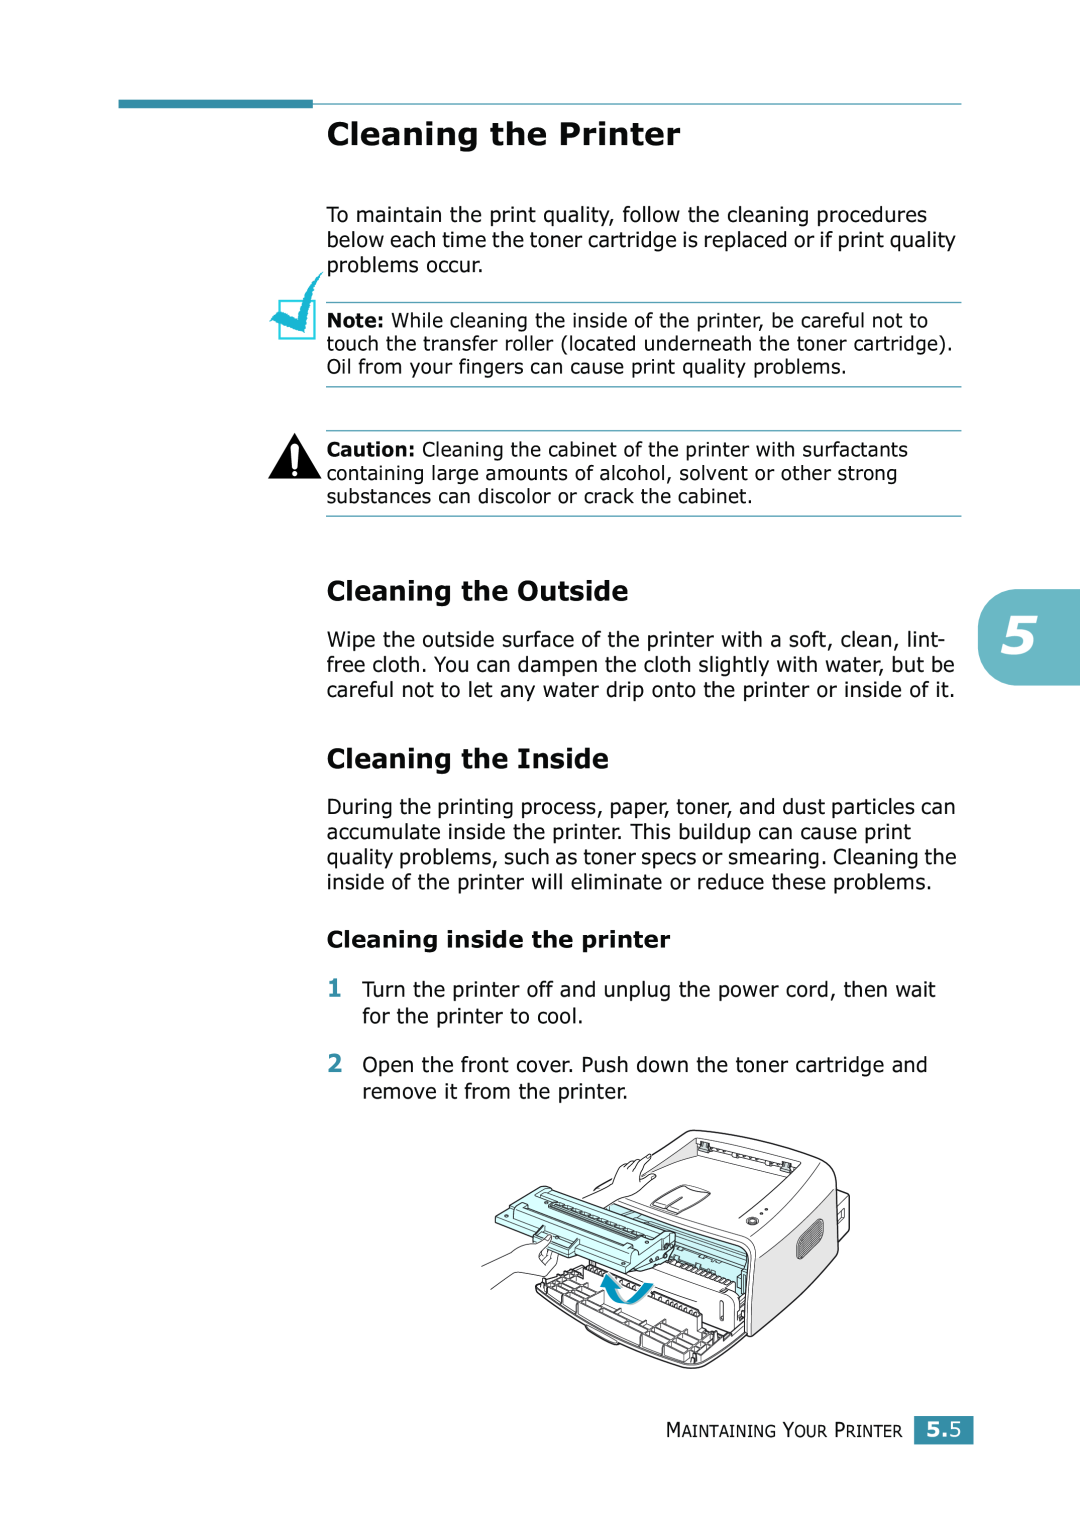 Samsung ML-1520 manual Cleaning the Printer, Cleaning the Outside, Cleaning the Inside, Cleaning inside the printer 